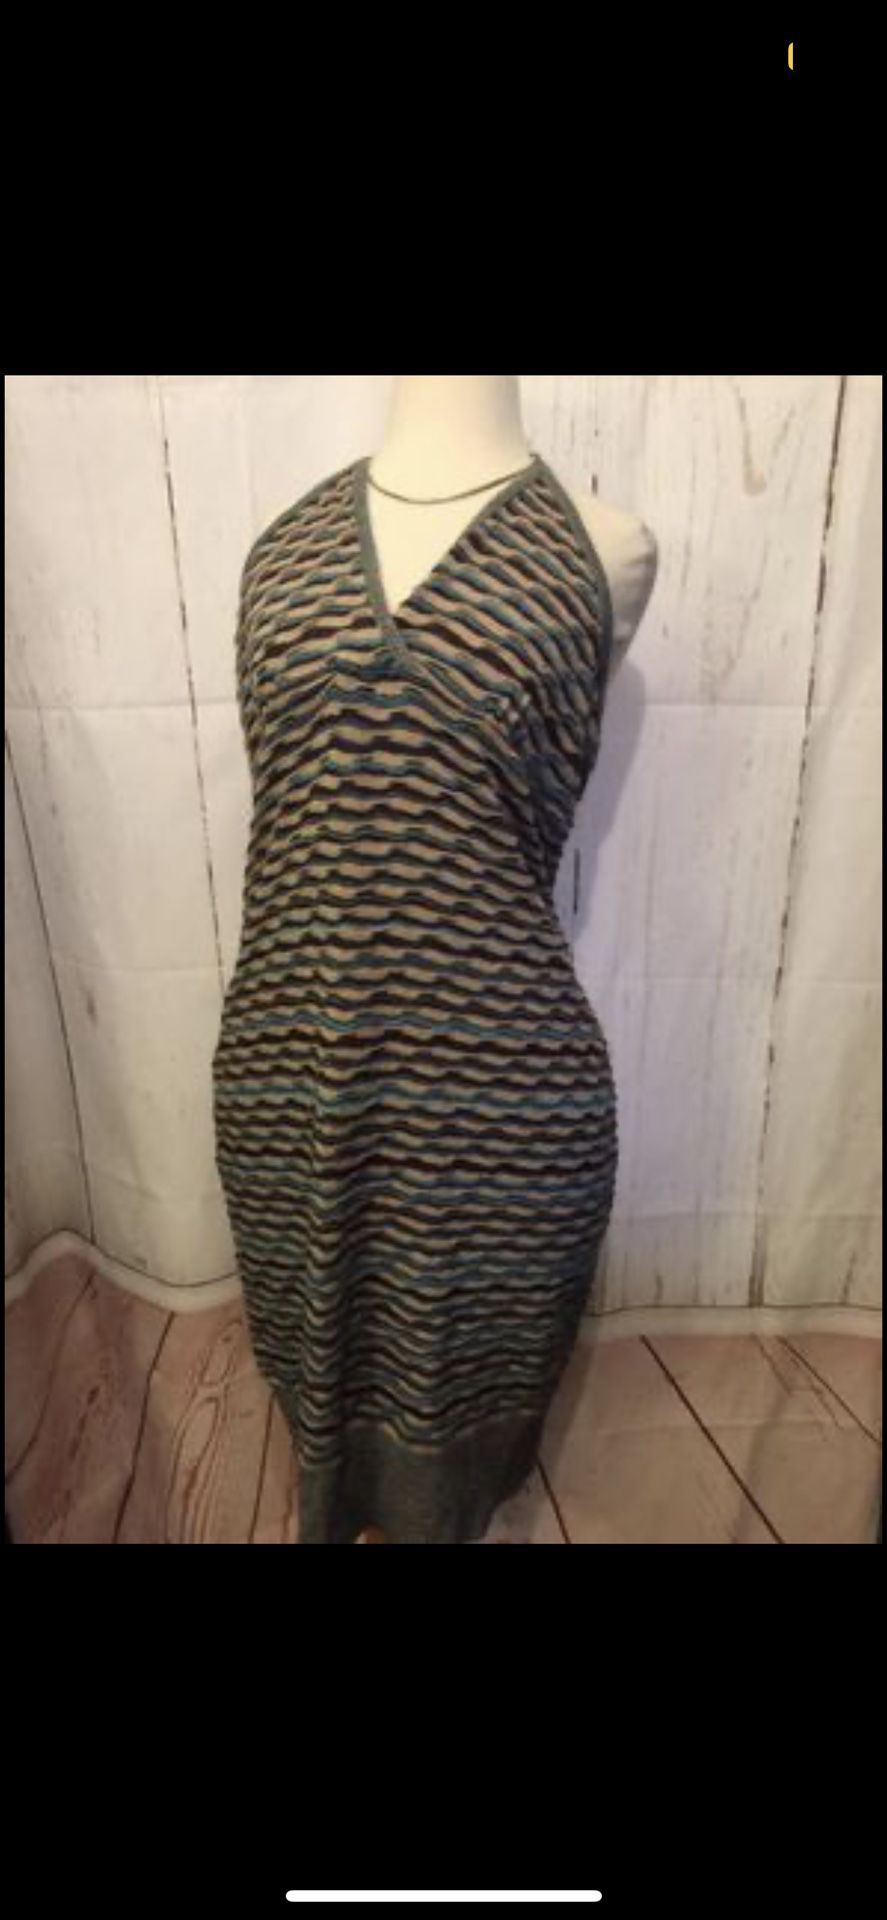 Windsor Women’s cute retro flared dress shimmering gold teal brown and beige colors  Size medium 